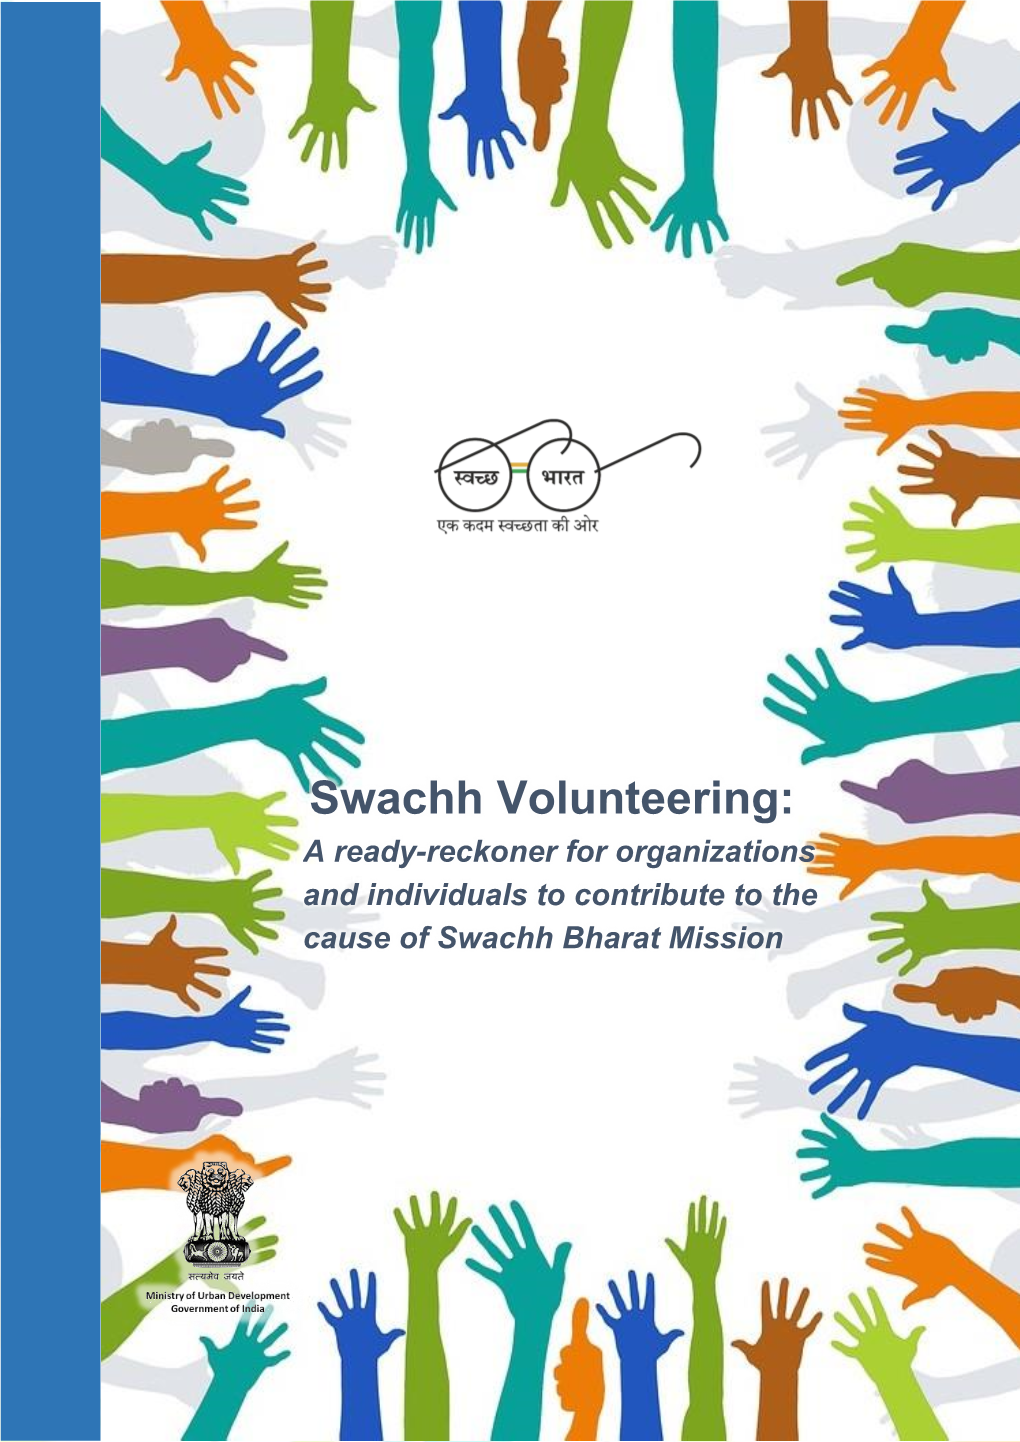 Swachh Volunteering: a Ready-Reckoner for Organizations and Individuals to Contribute to the Cause of Swachh Bharat Mission